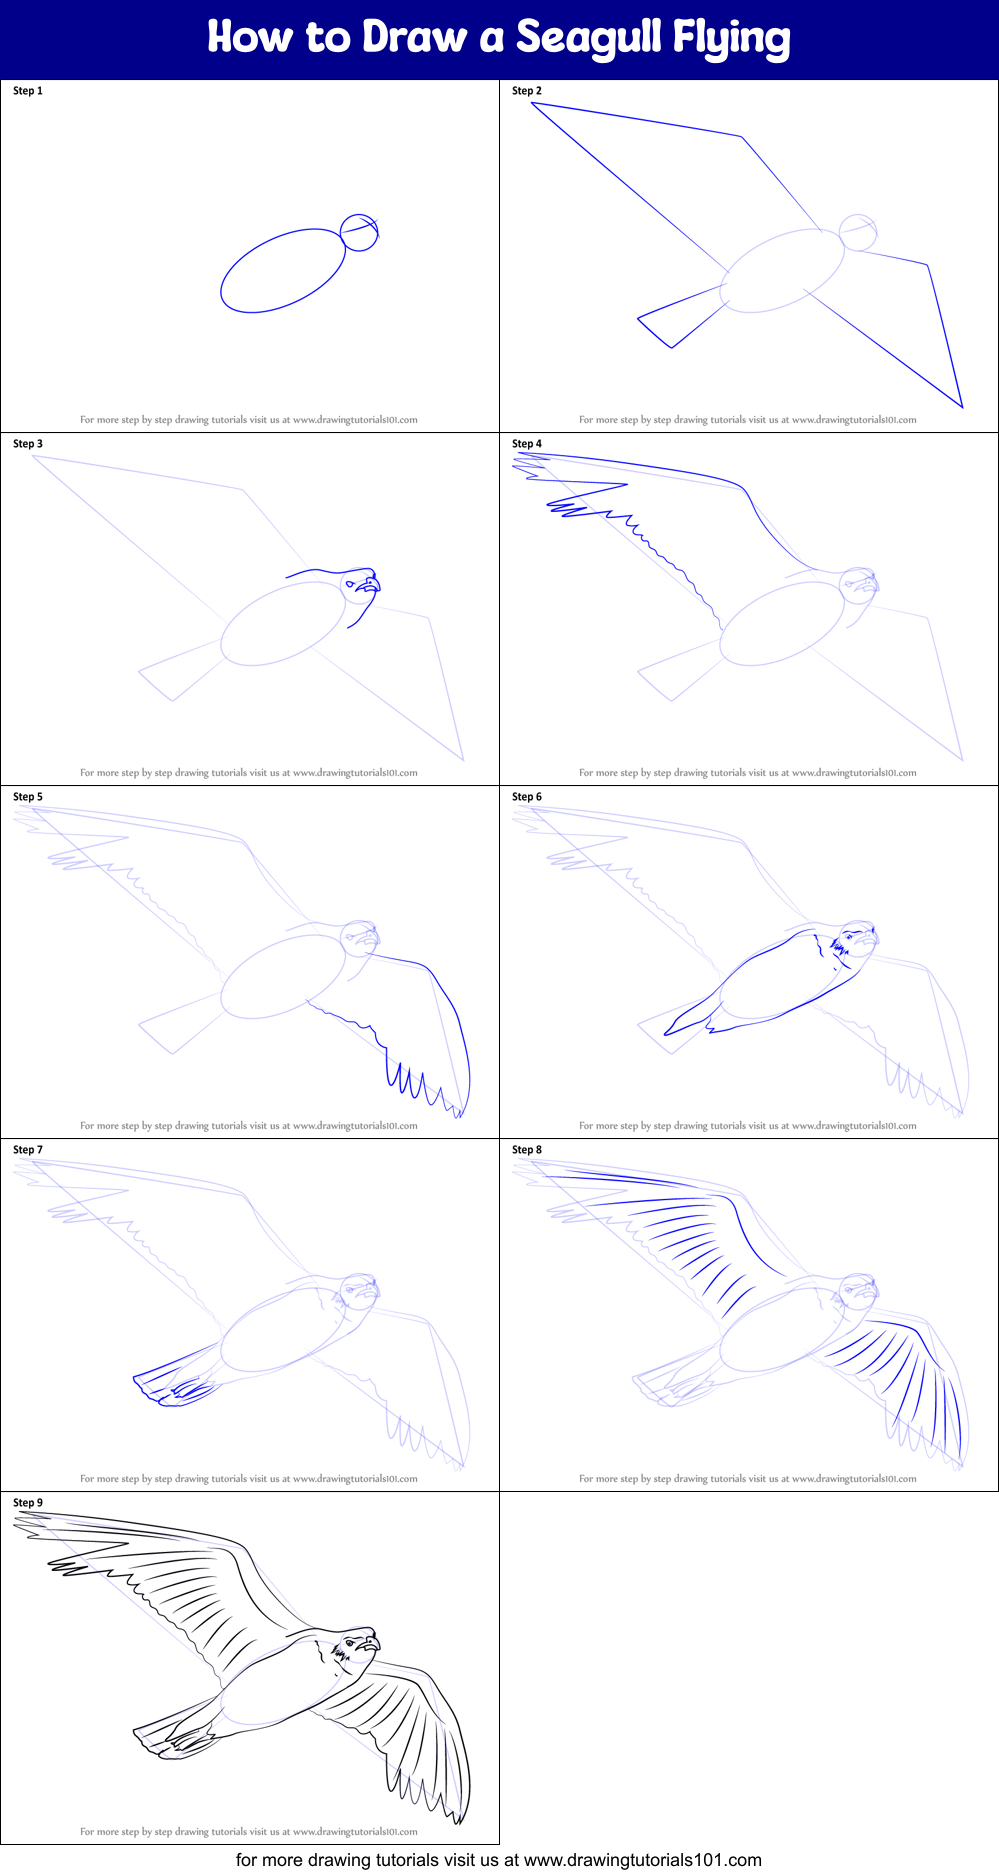 How to Draw a Seagull Flying printable step by step